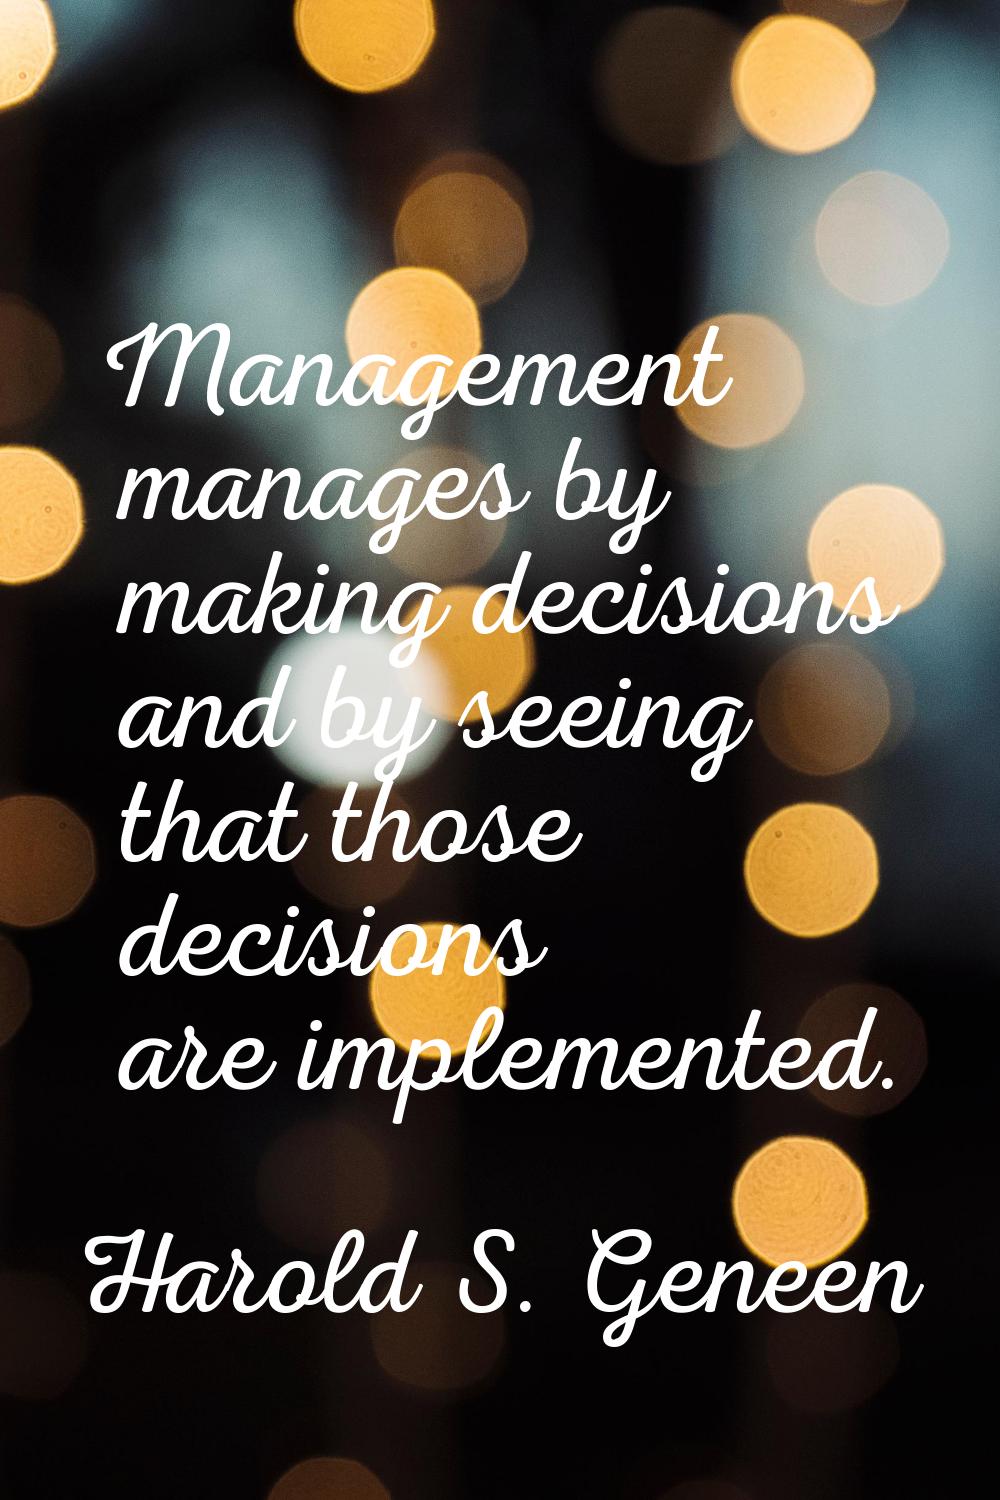 Management manages by making decisions and by seeing that those decisions are implemented.